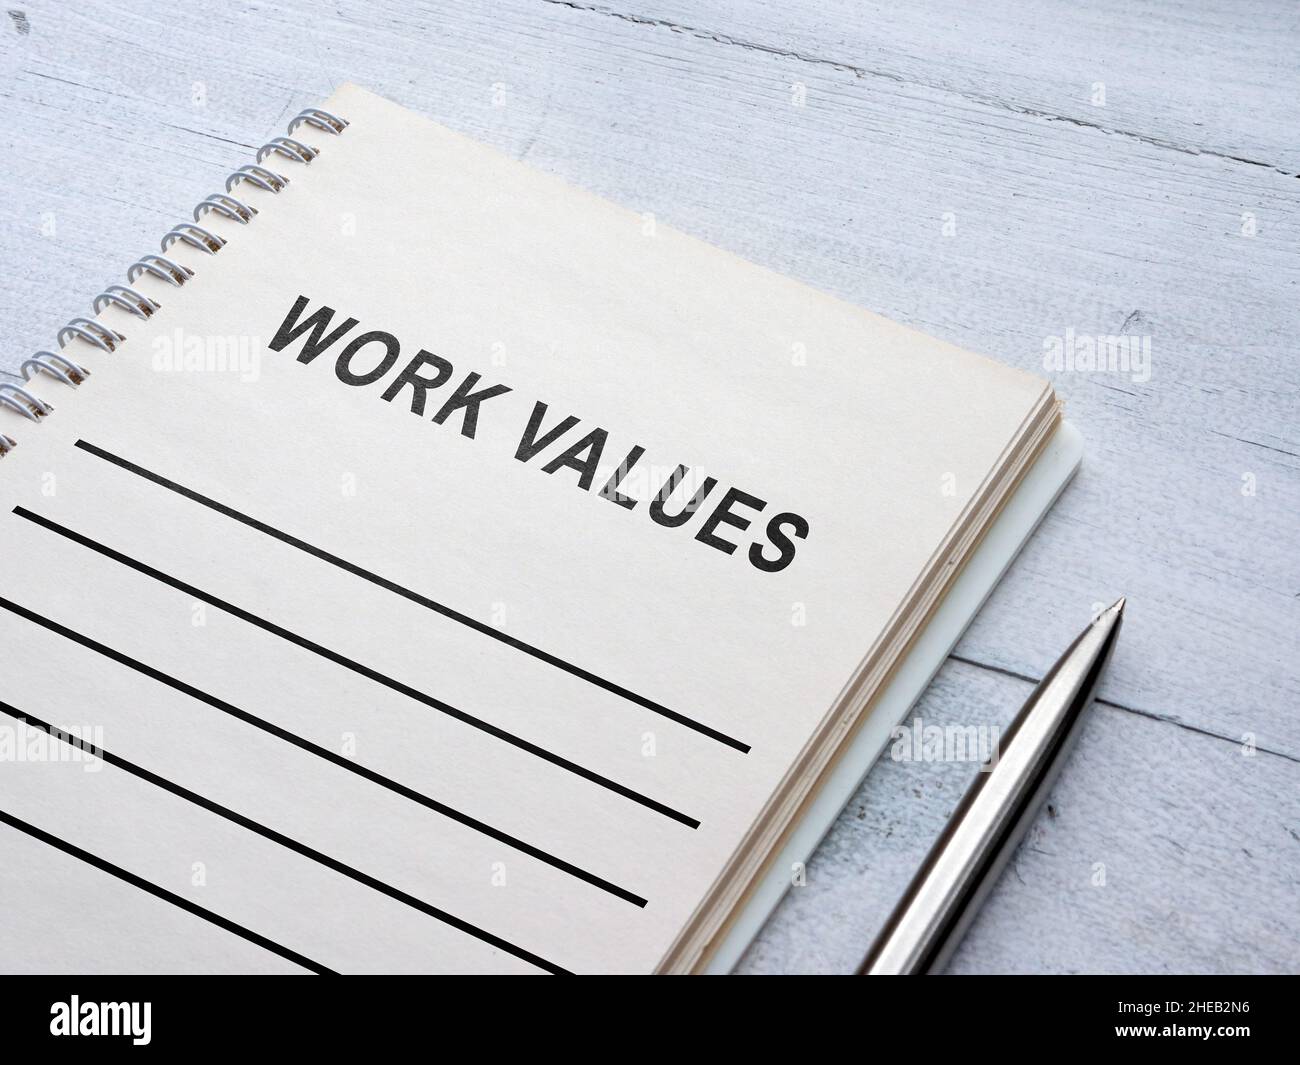 Empty Work values list on the wooden surface. Stock Photo